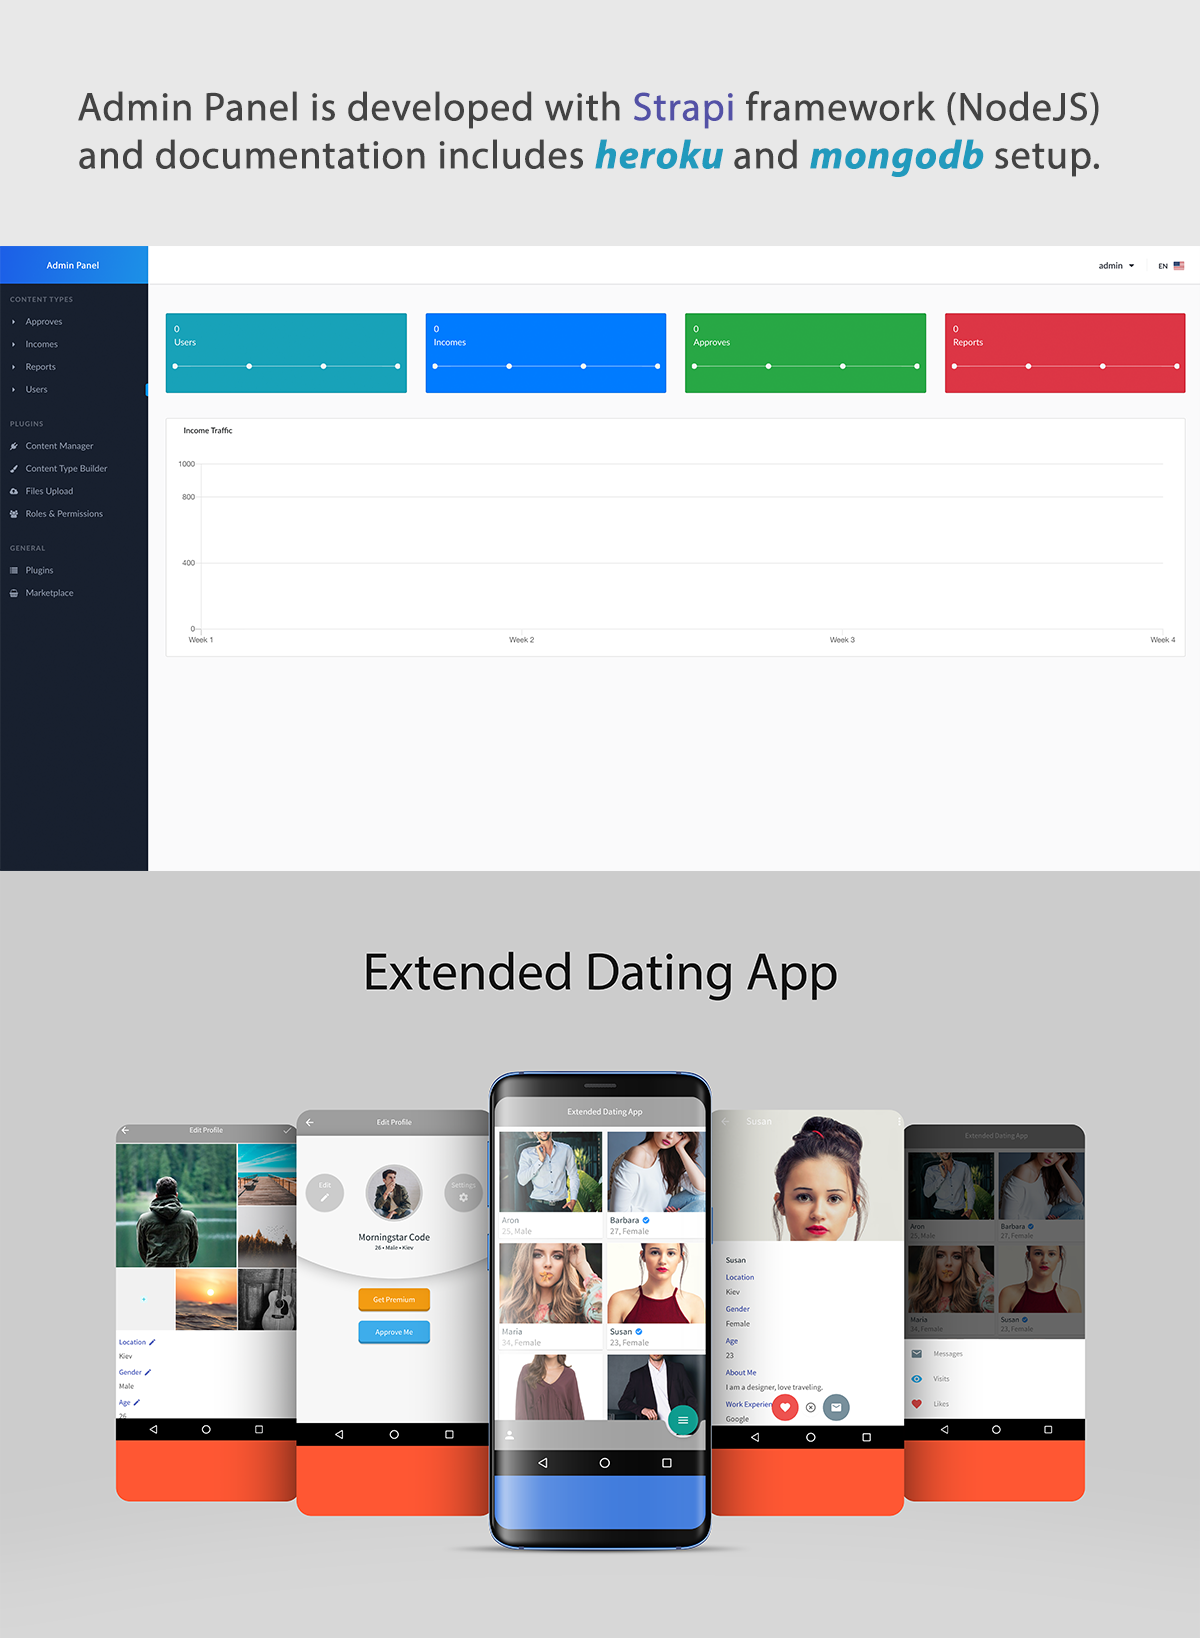 Extended Dating App